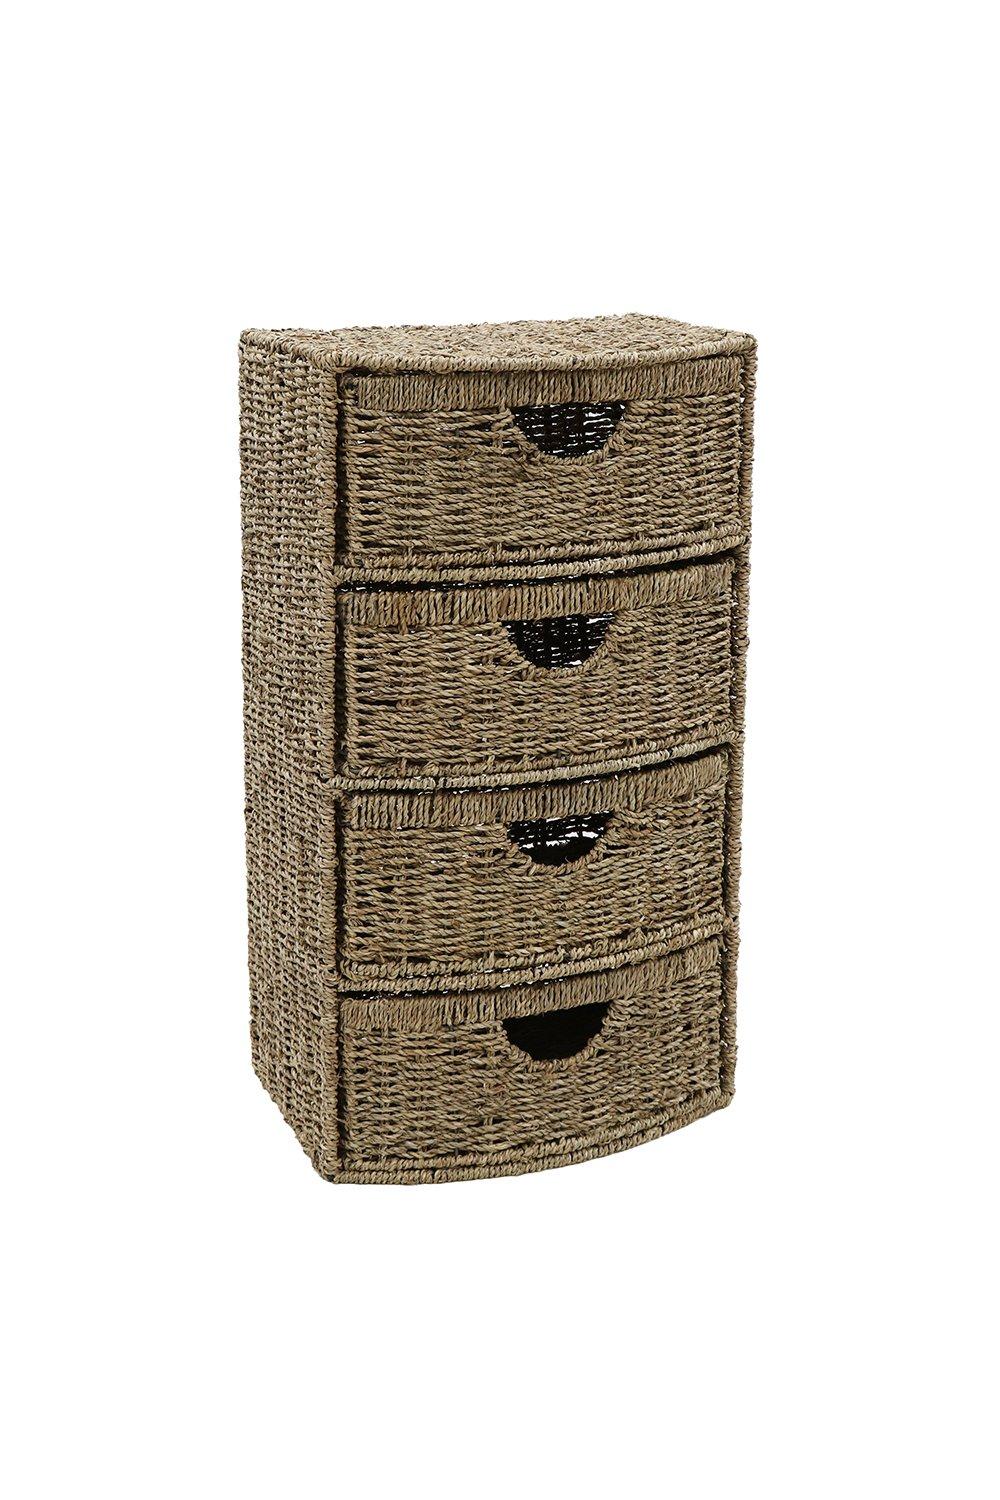 Seagrass 4 Drawer Bow Front Storage Tower